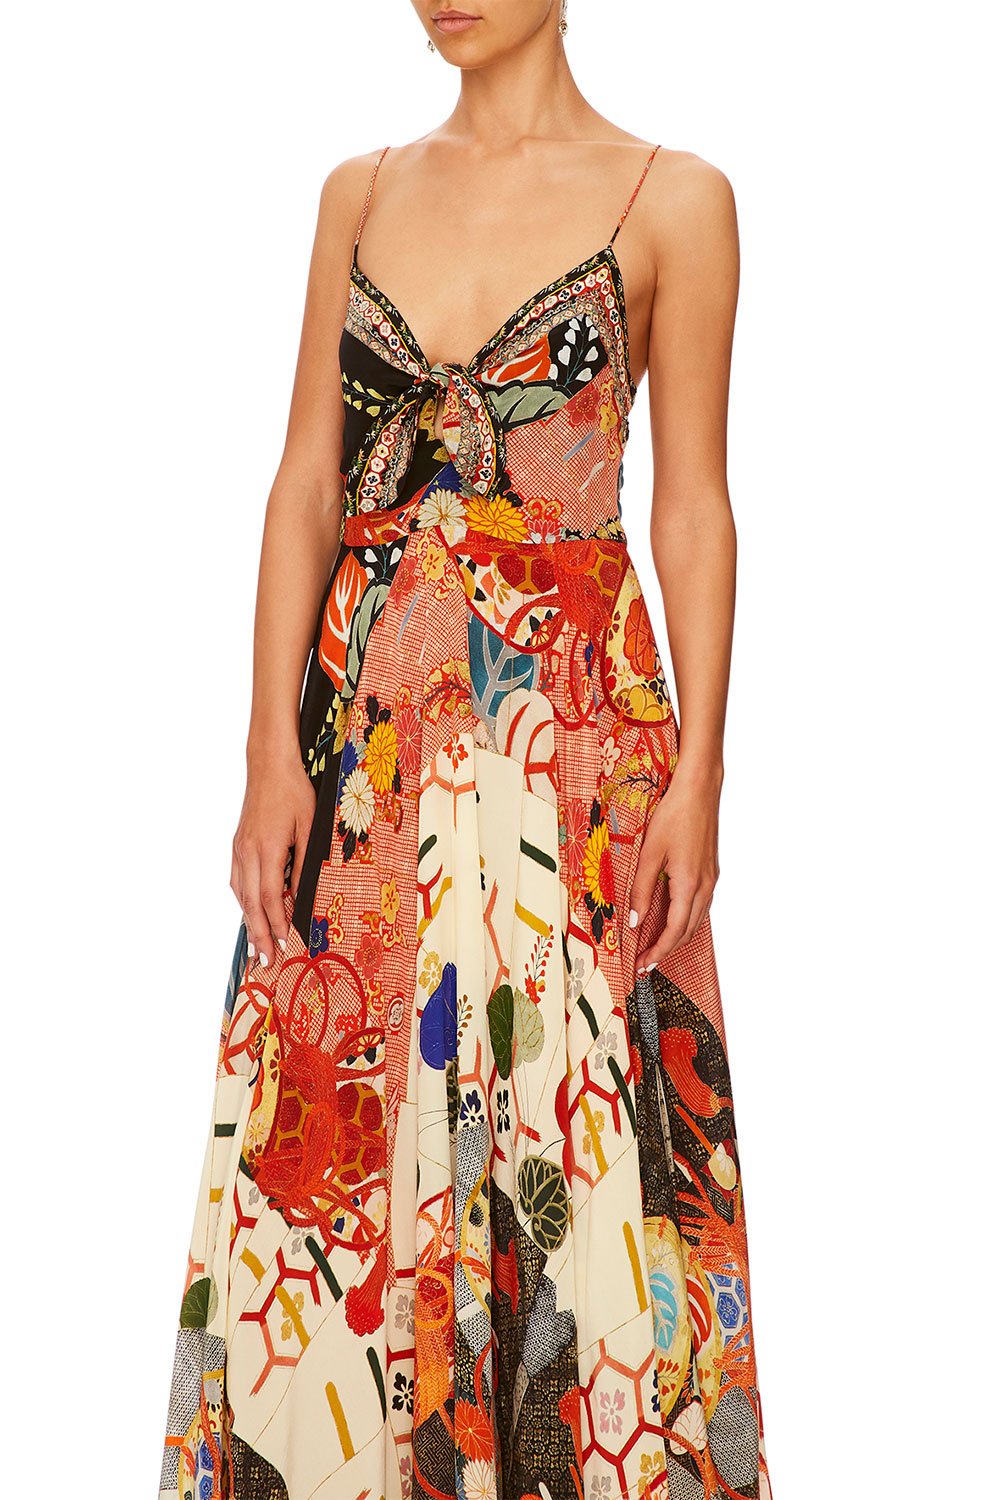 KISSING THE SUN LONG DRESS W TIE FRONT